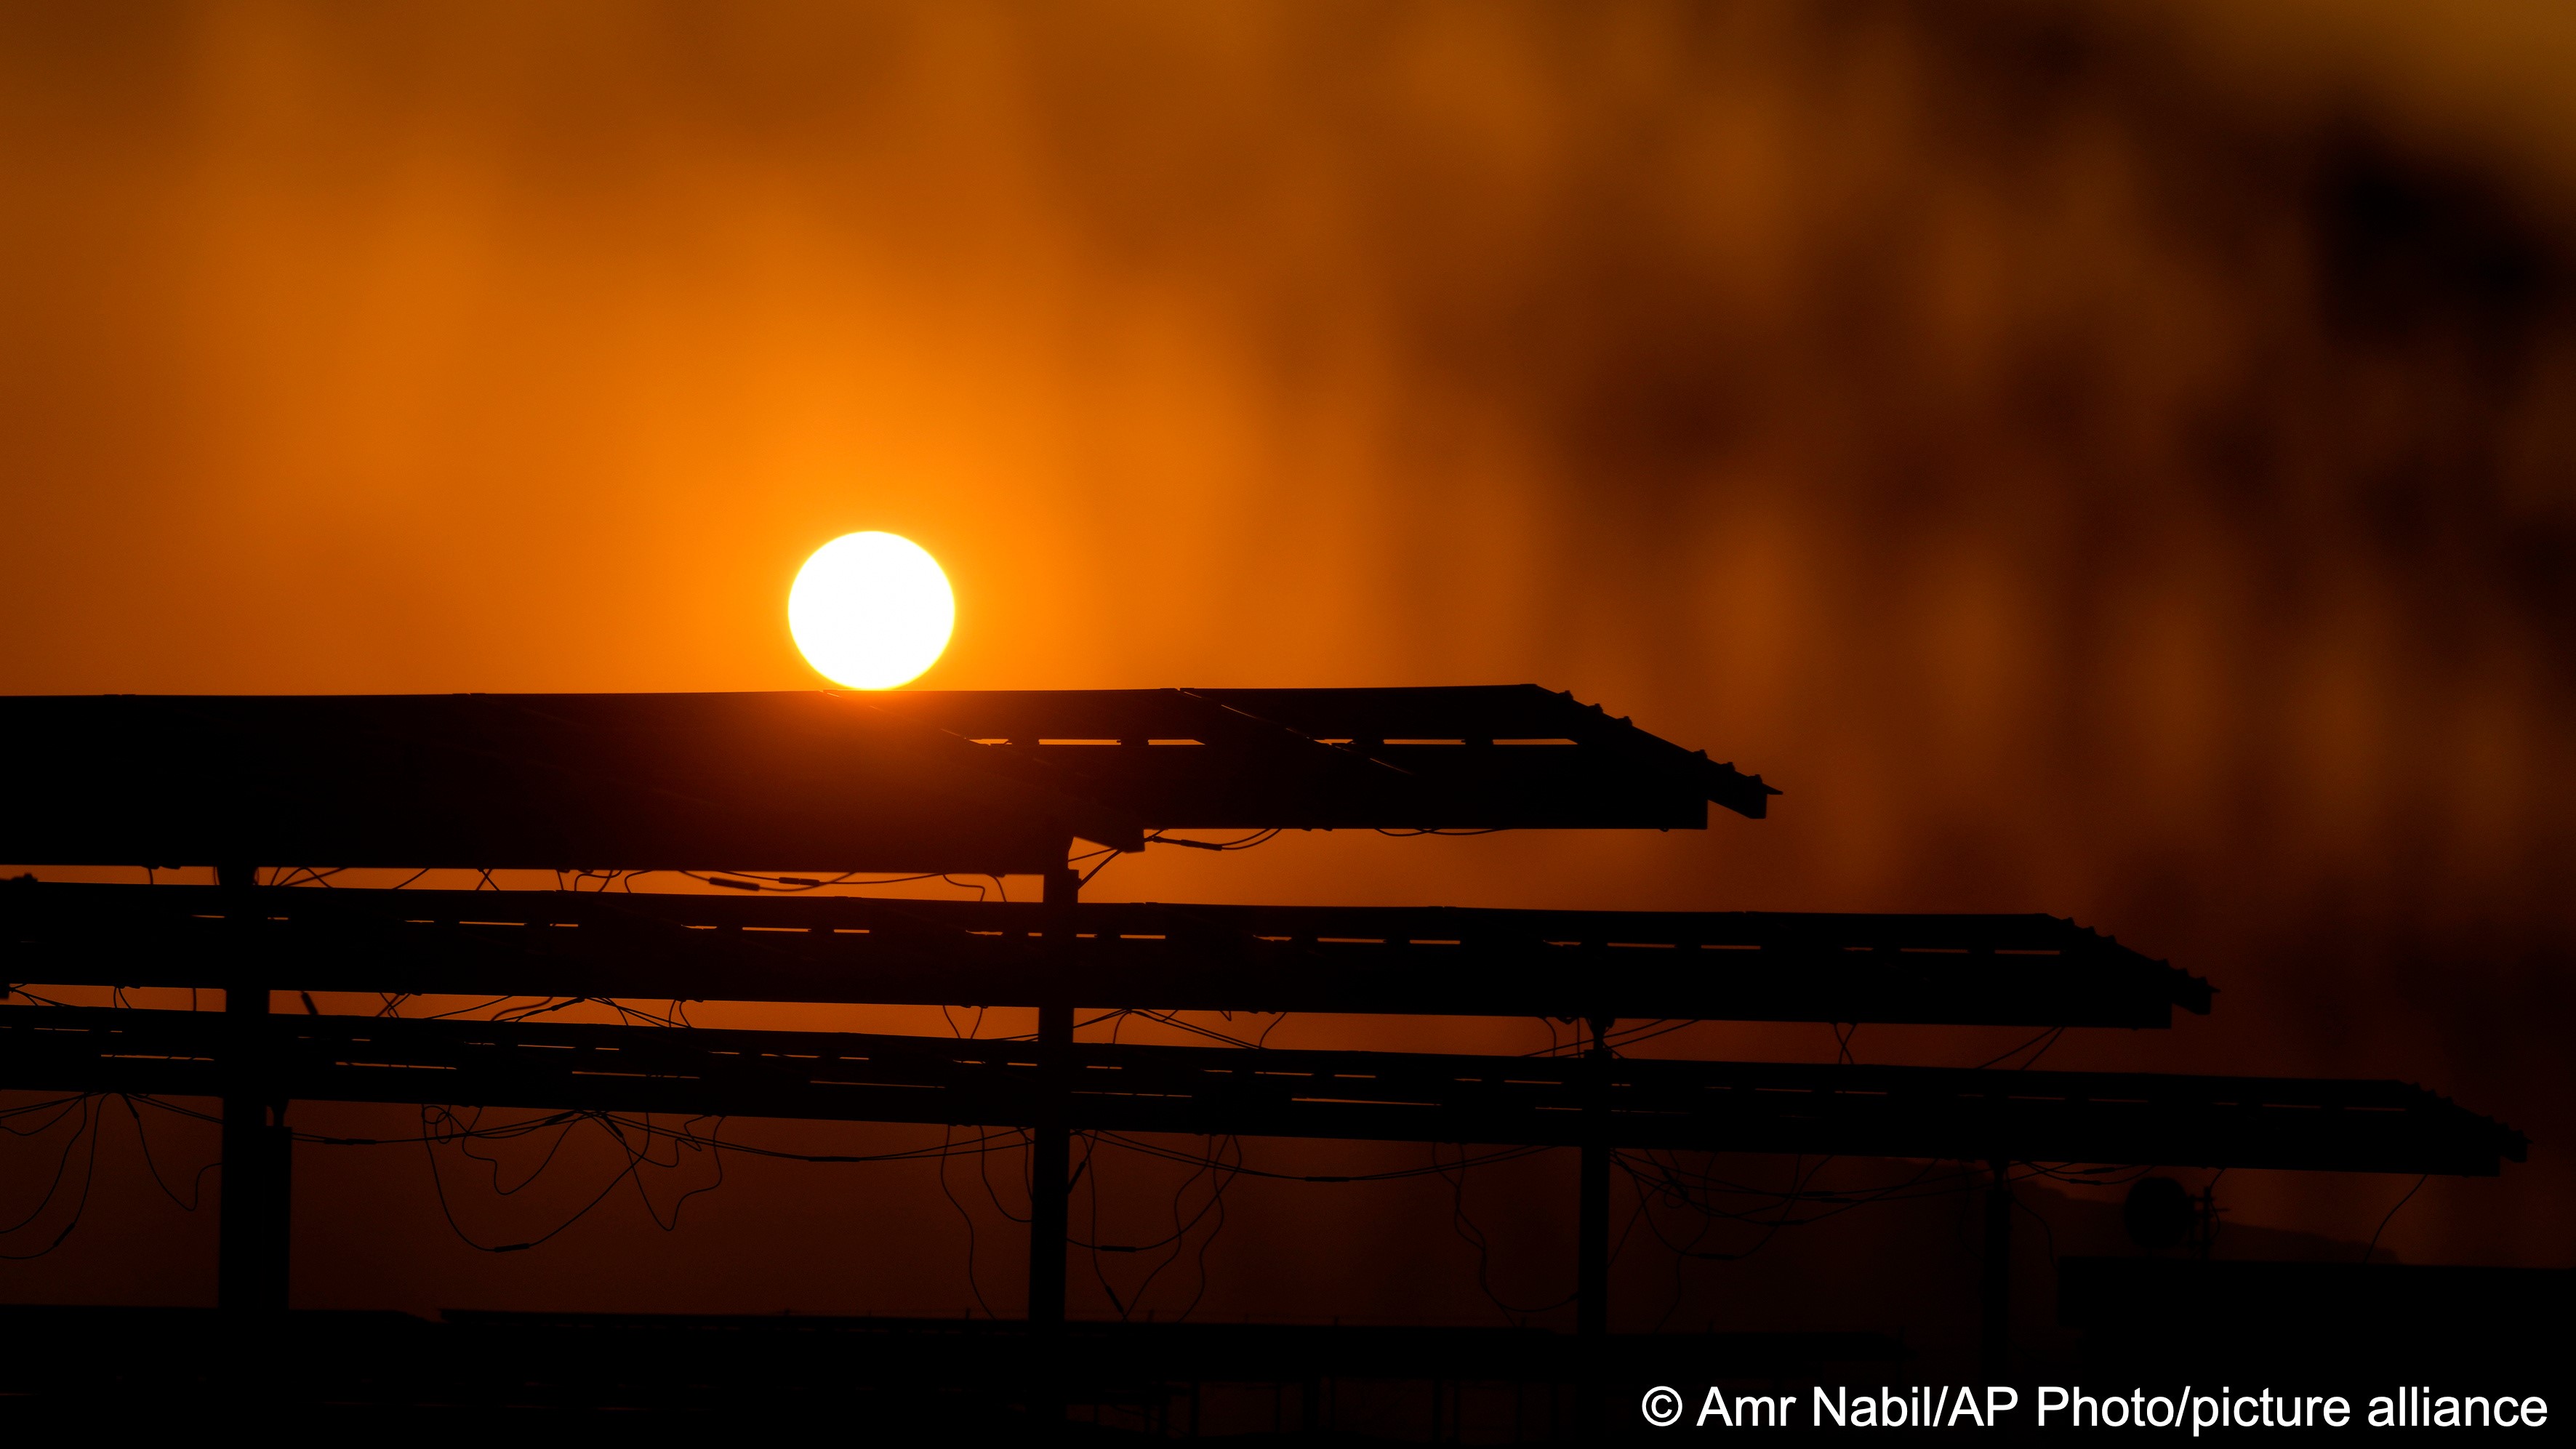 The sun sets behind photovoltaic solar panels at Benban Solar Park, one of the world’s largest solar power plant in the world, in Aswan, Egypt, 19 October 2022 (photo: AP Photo/Amr Nabil)